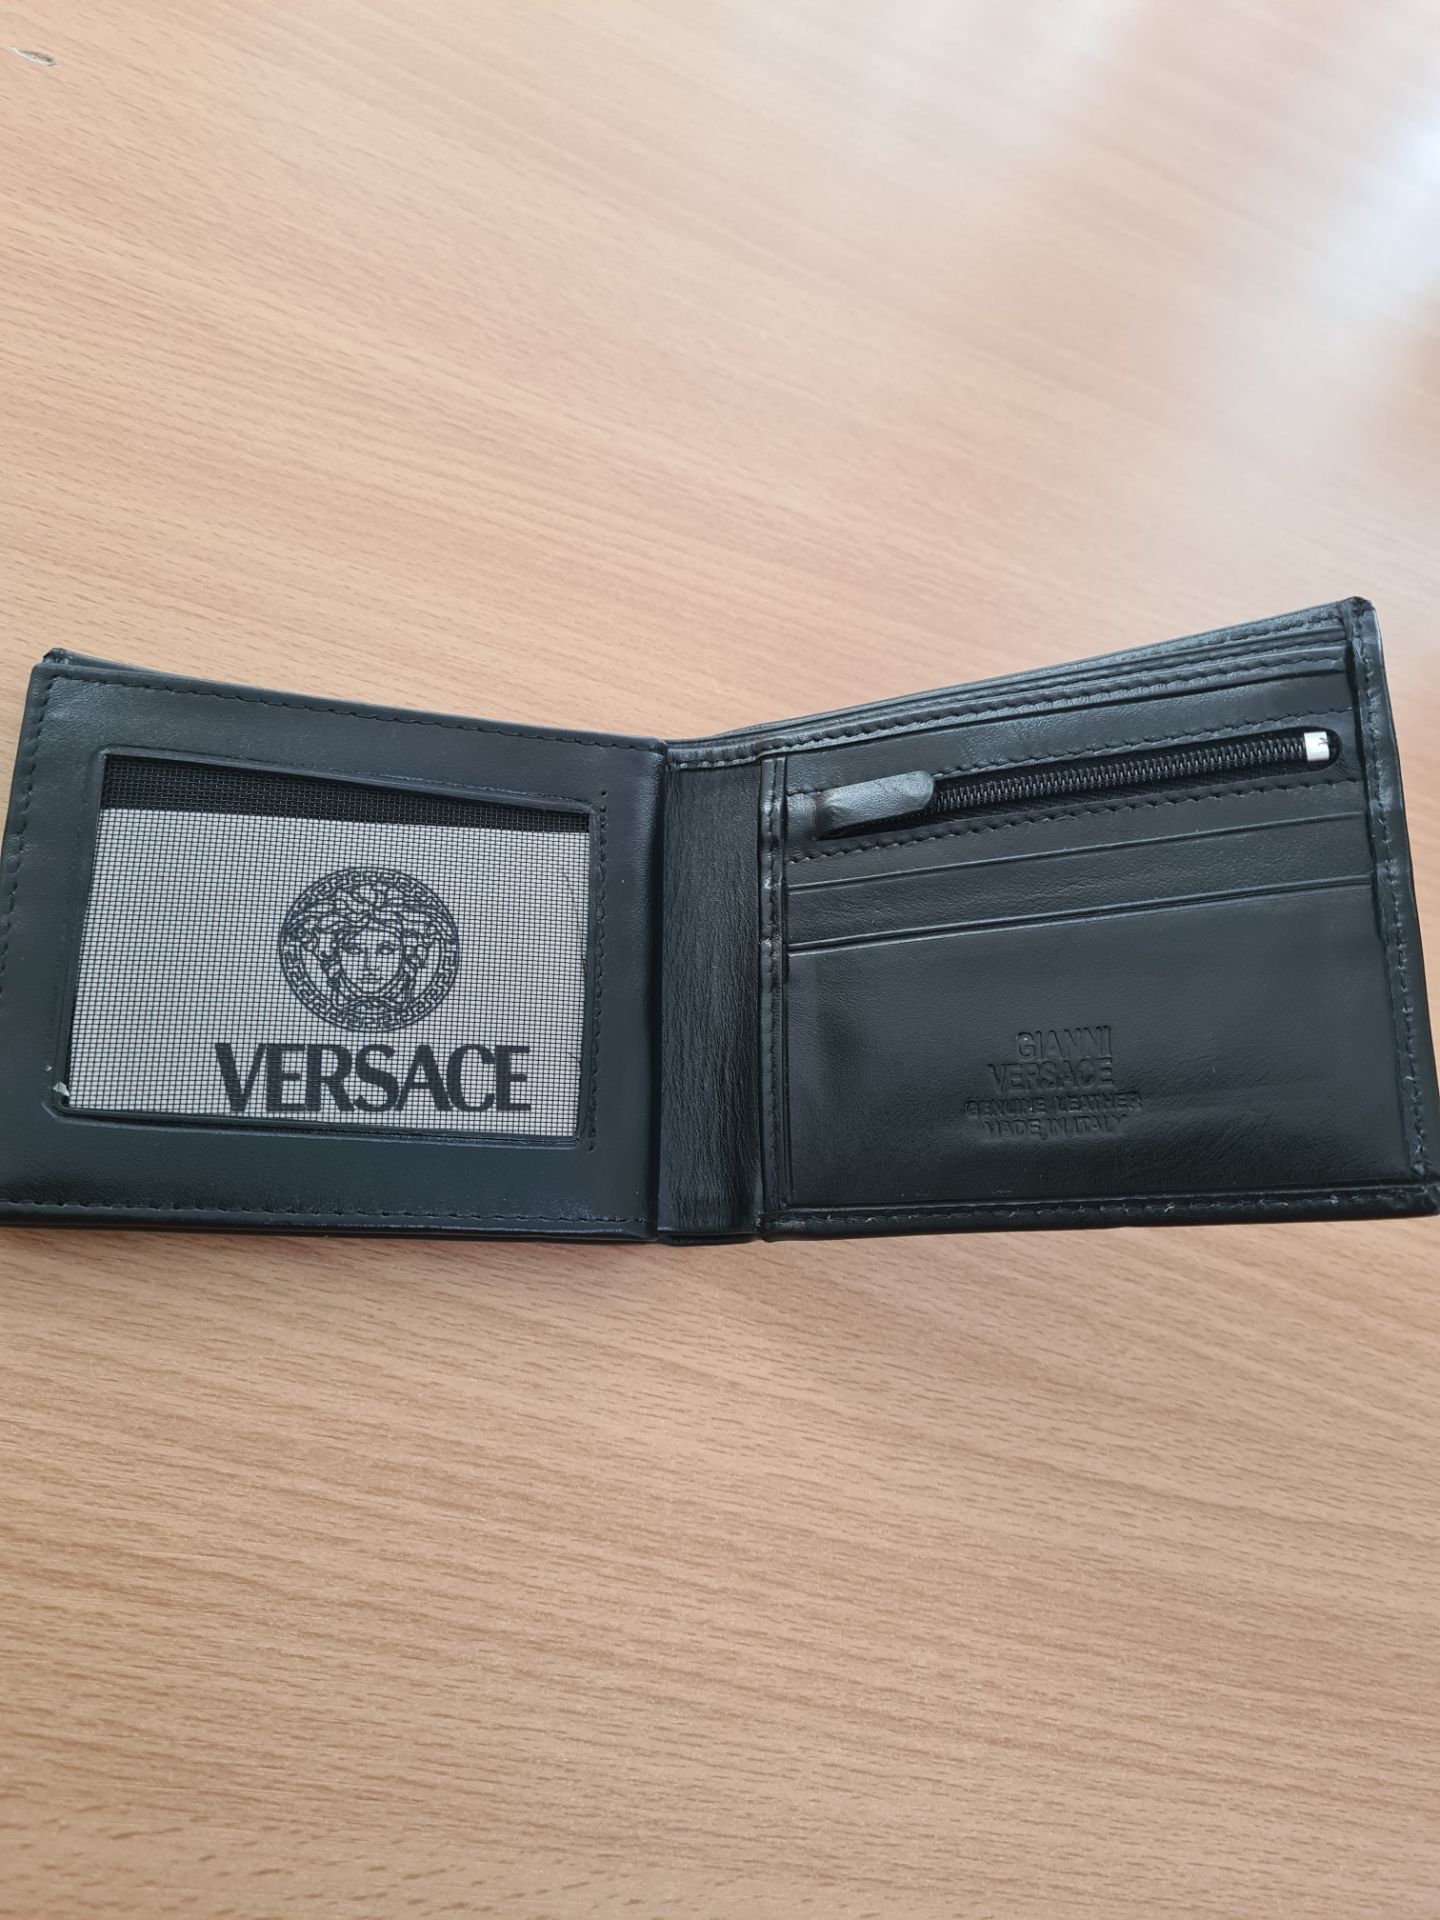 versace men's leather wallet - new with box - Image 7 of 8